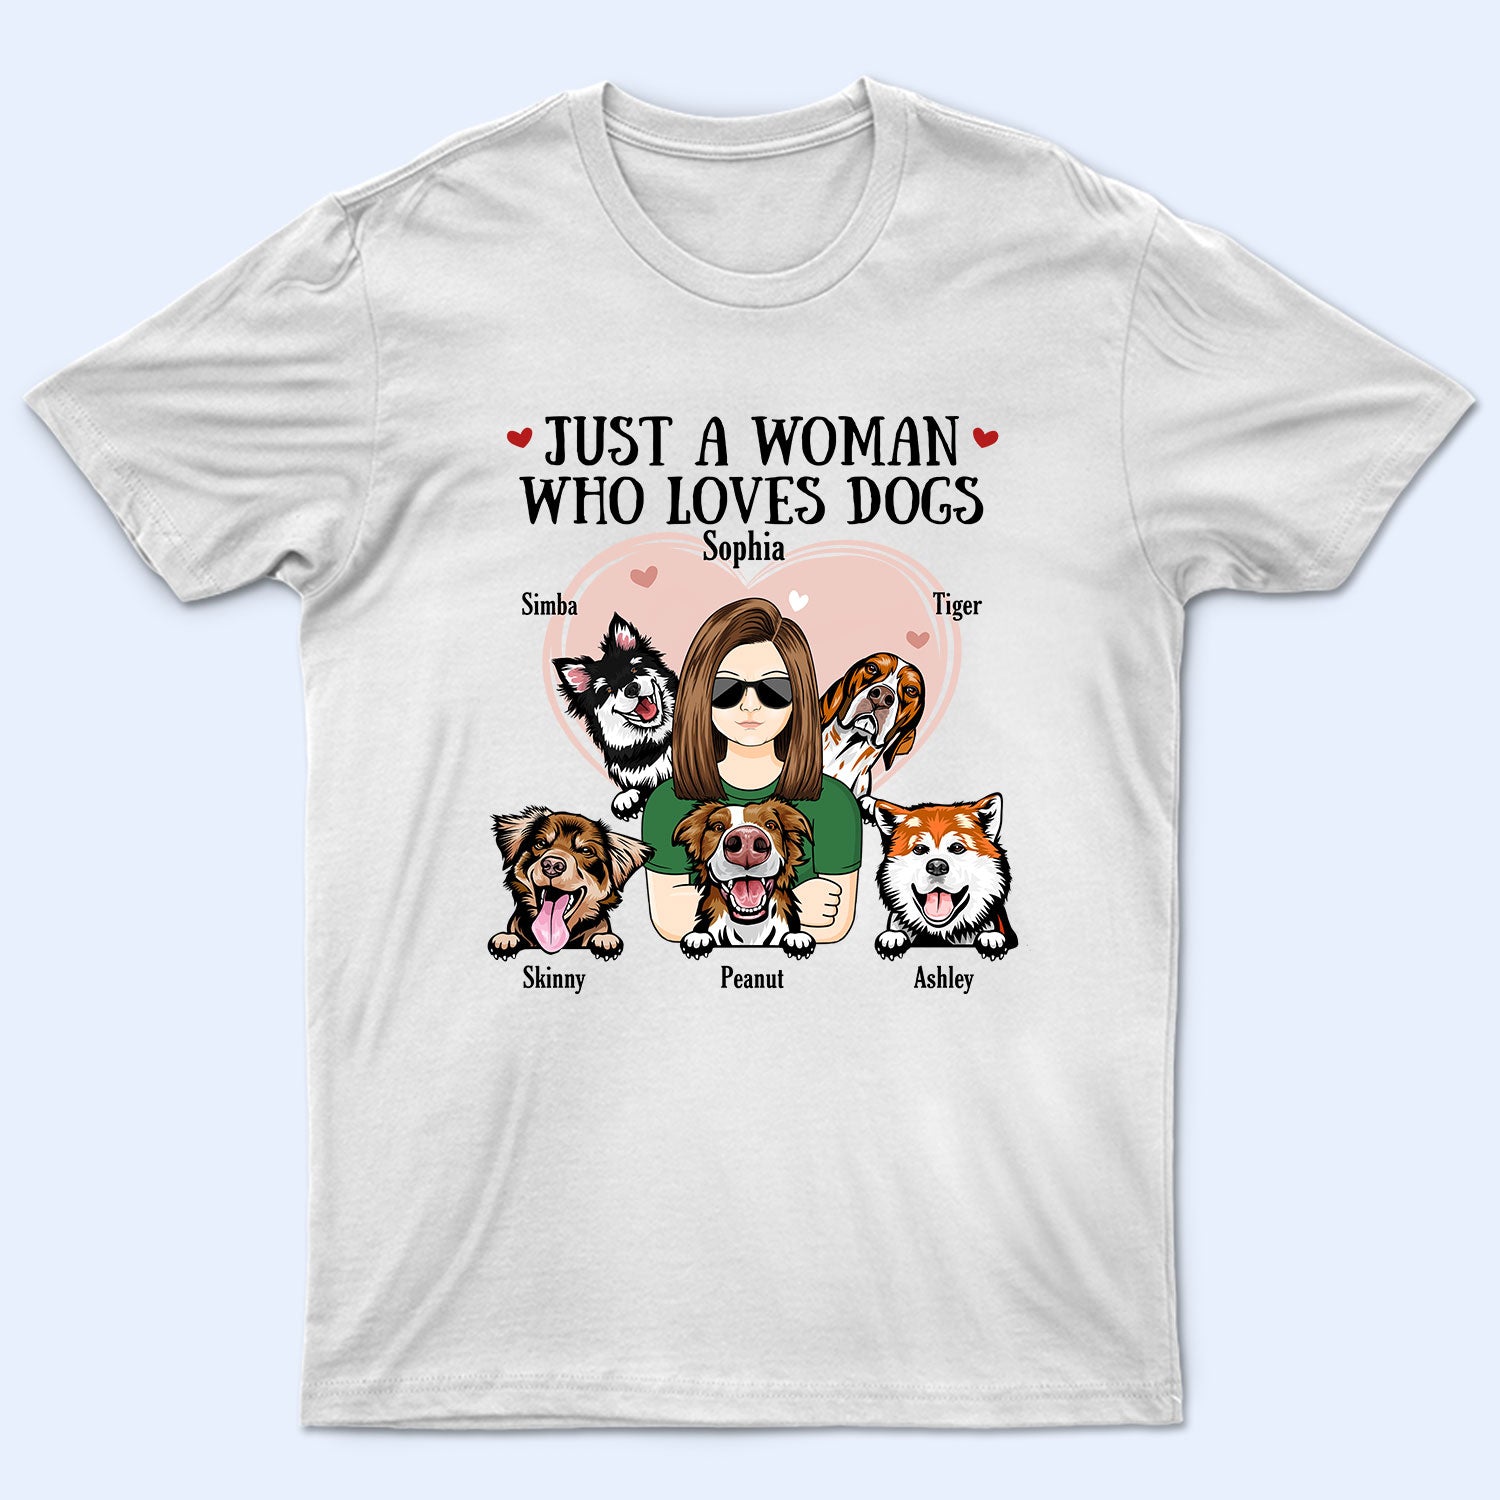 Just A Woman Man Who Loves Dogs - Birthday Gift For Dog Lovers, Pet Lovers - Personalized Custom T Shirt